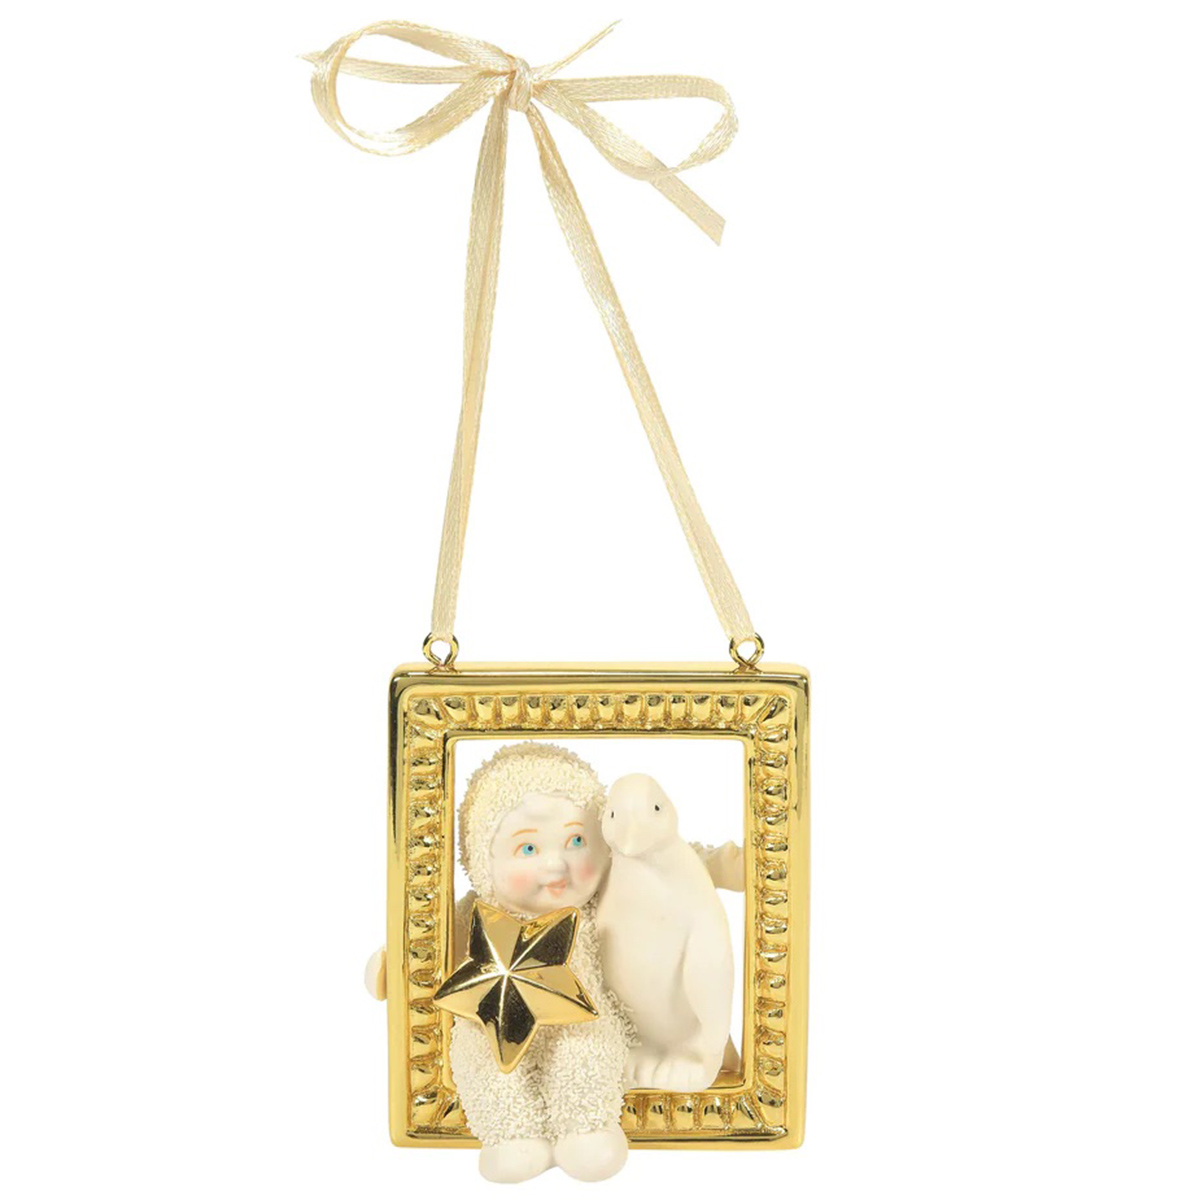 Department 56 Snowbabies(tm) 3.5in. Perfectly Framed Ornament